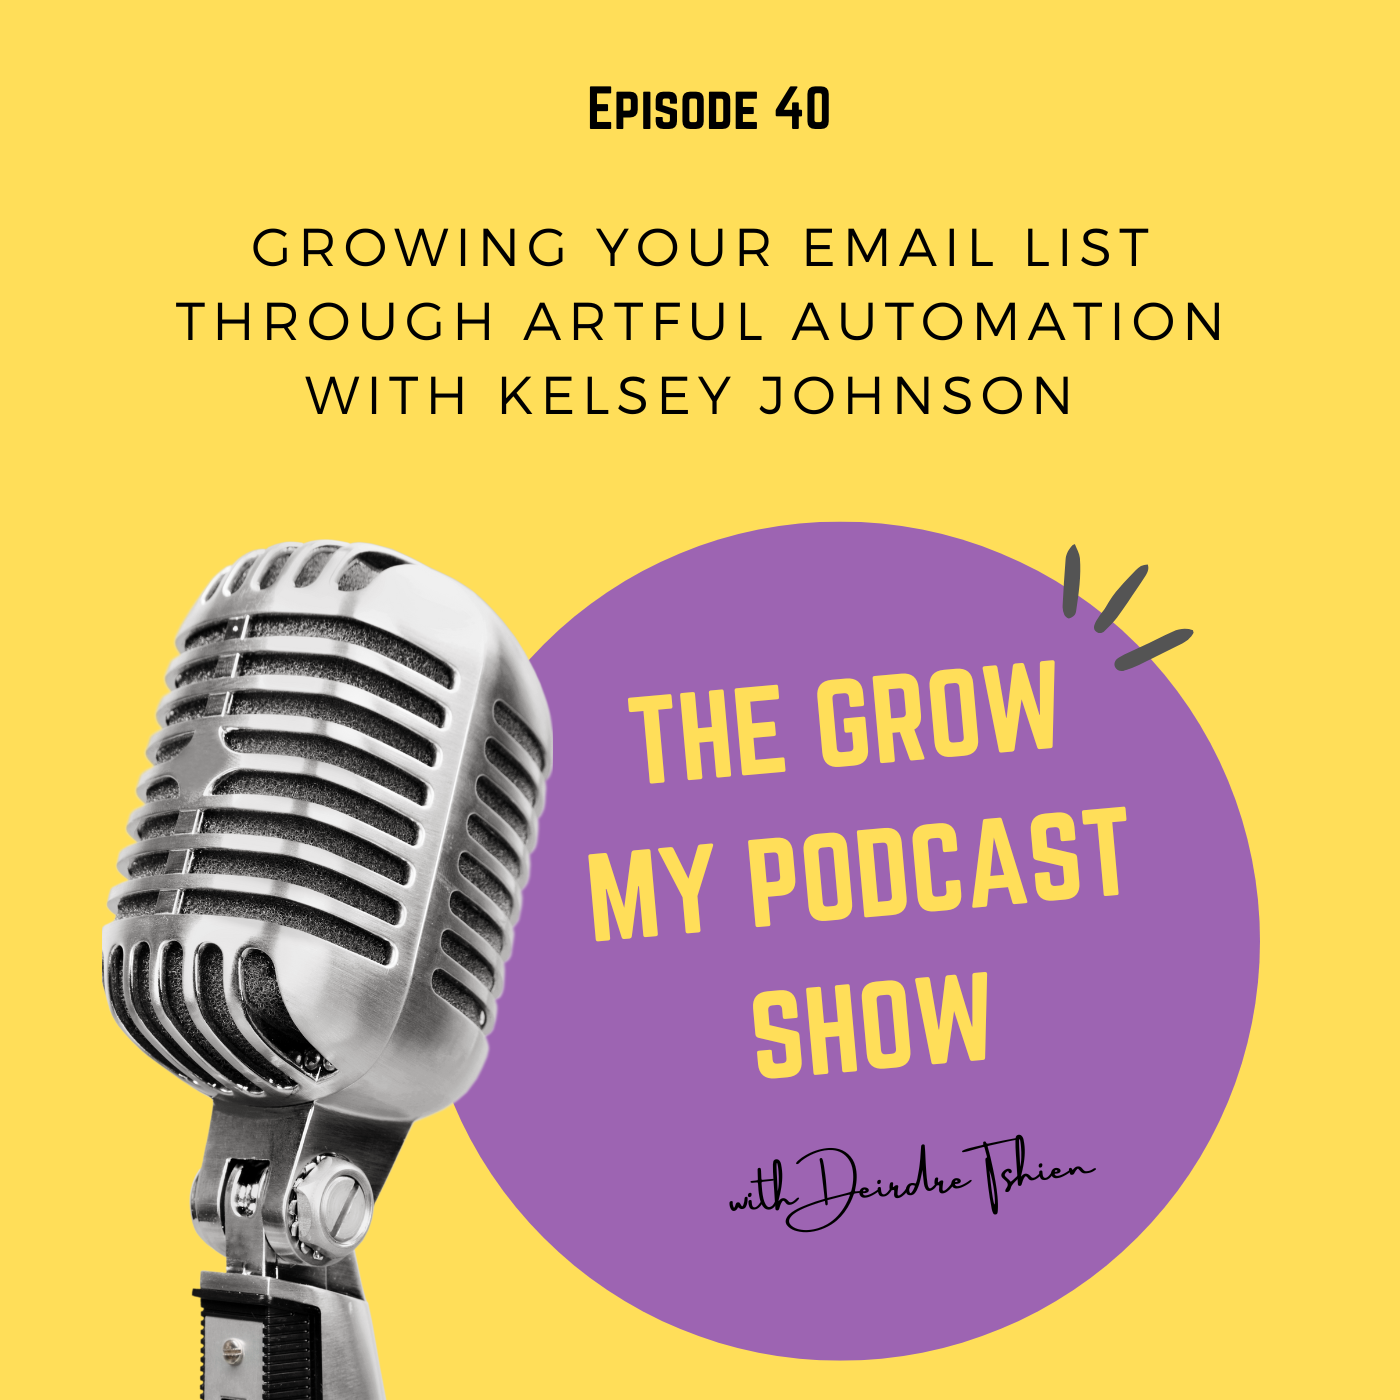 40. Growing your email list through artful automation with Kelsey Johnson